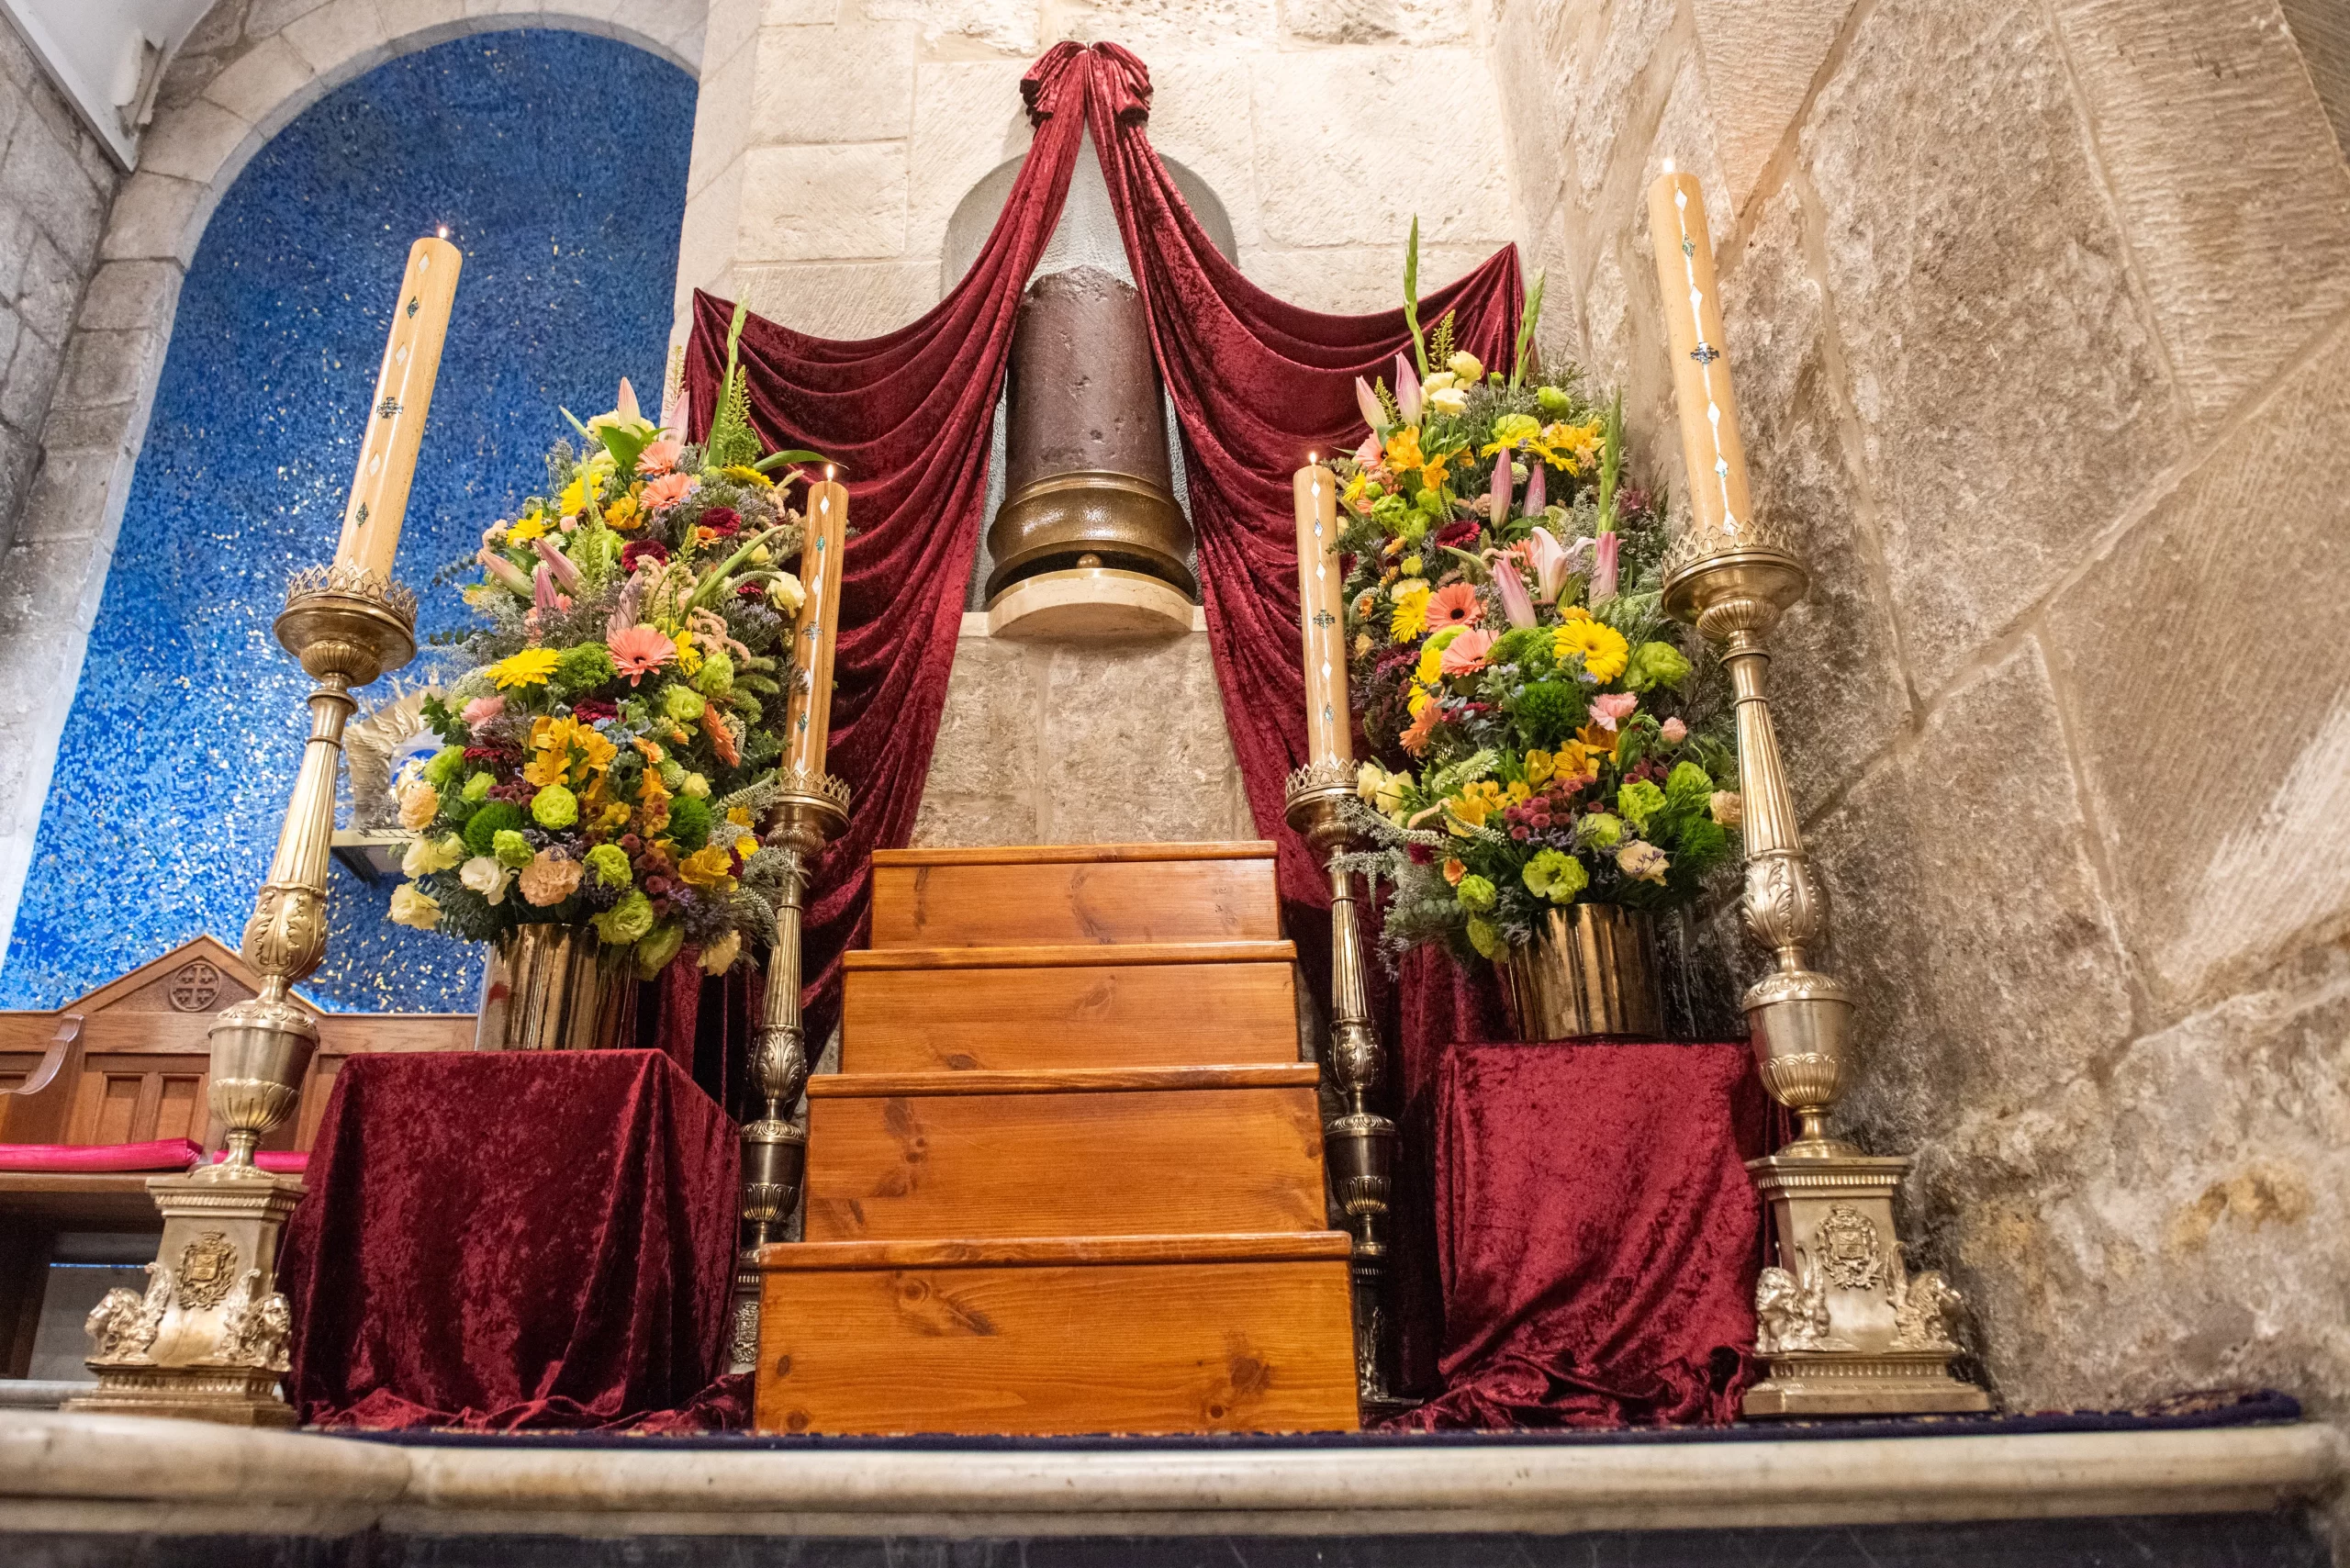 The column of the Flagellation, made of red porphyry, is kept in a niche within the Chapel of the Apparition inside the Basilica of the Holy Sepulcher, where it has been preserved since the 14th century. On Holy Wednesday, a day especially dedicated to its veneration, the friars of the Custody of the Holy Land prepare a special adornment with drapes and flowers for the column. March 27, 2024. Credit: Marinella Bandini